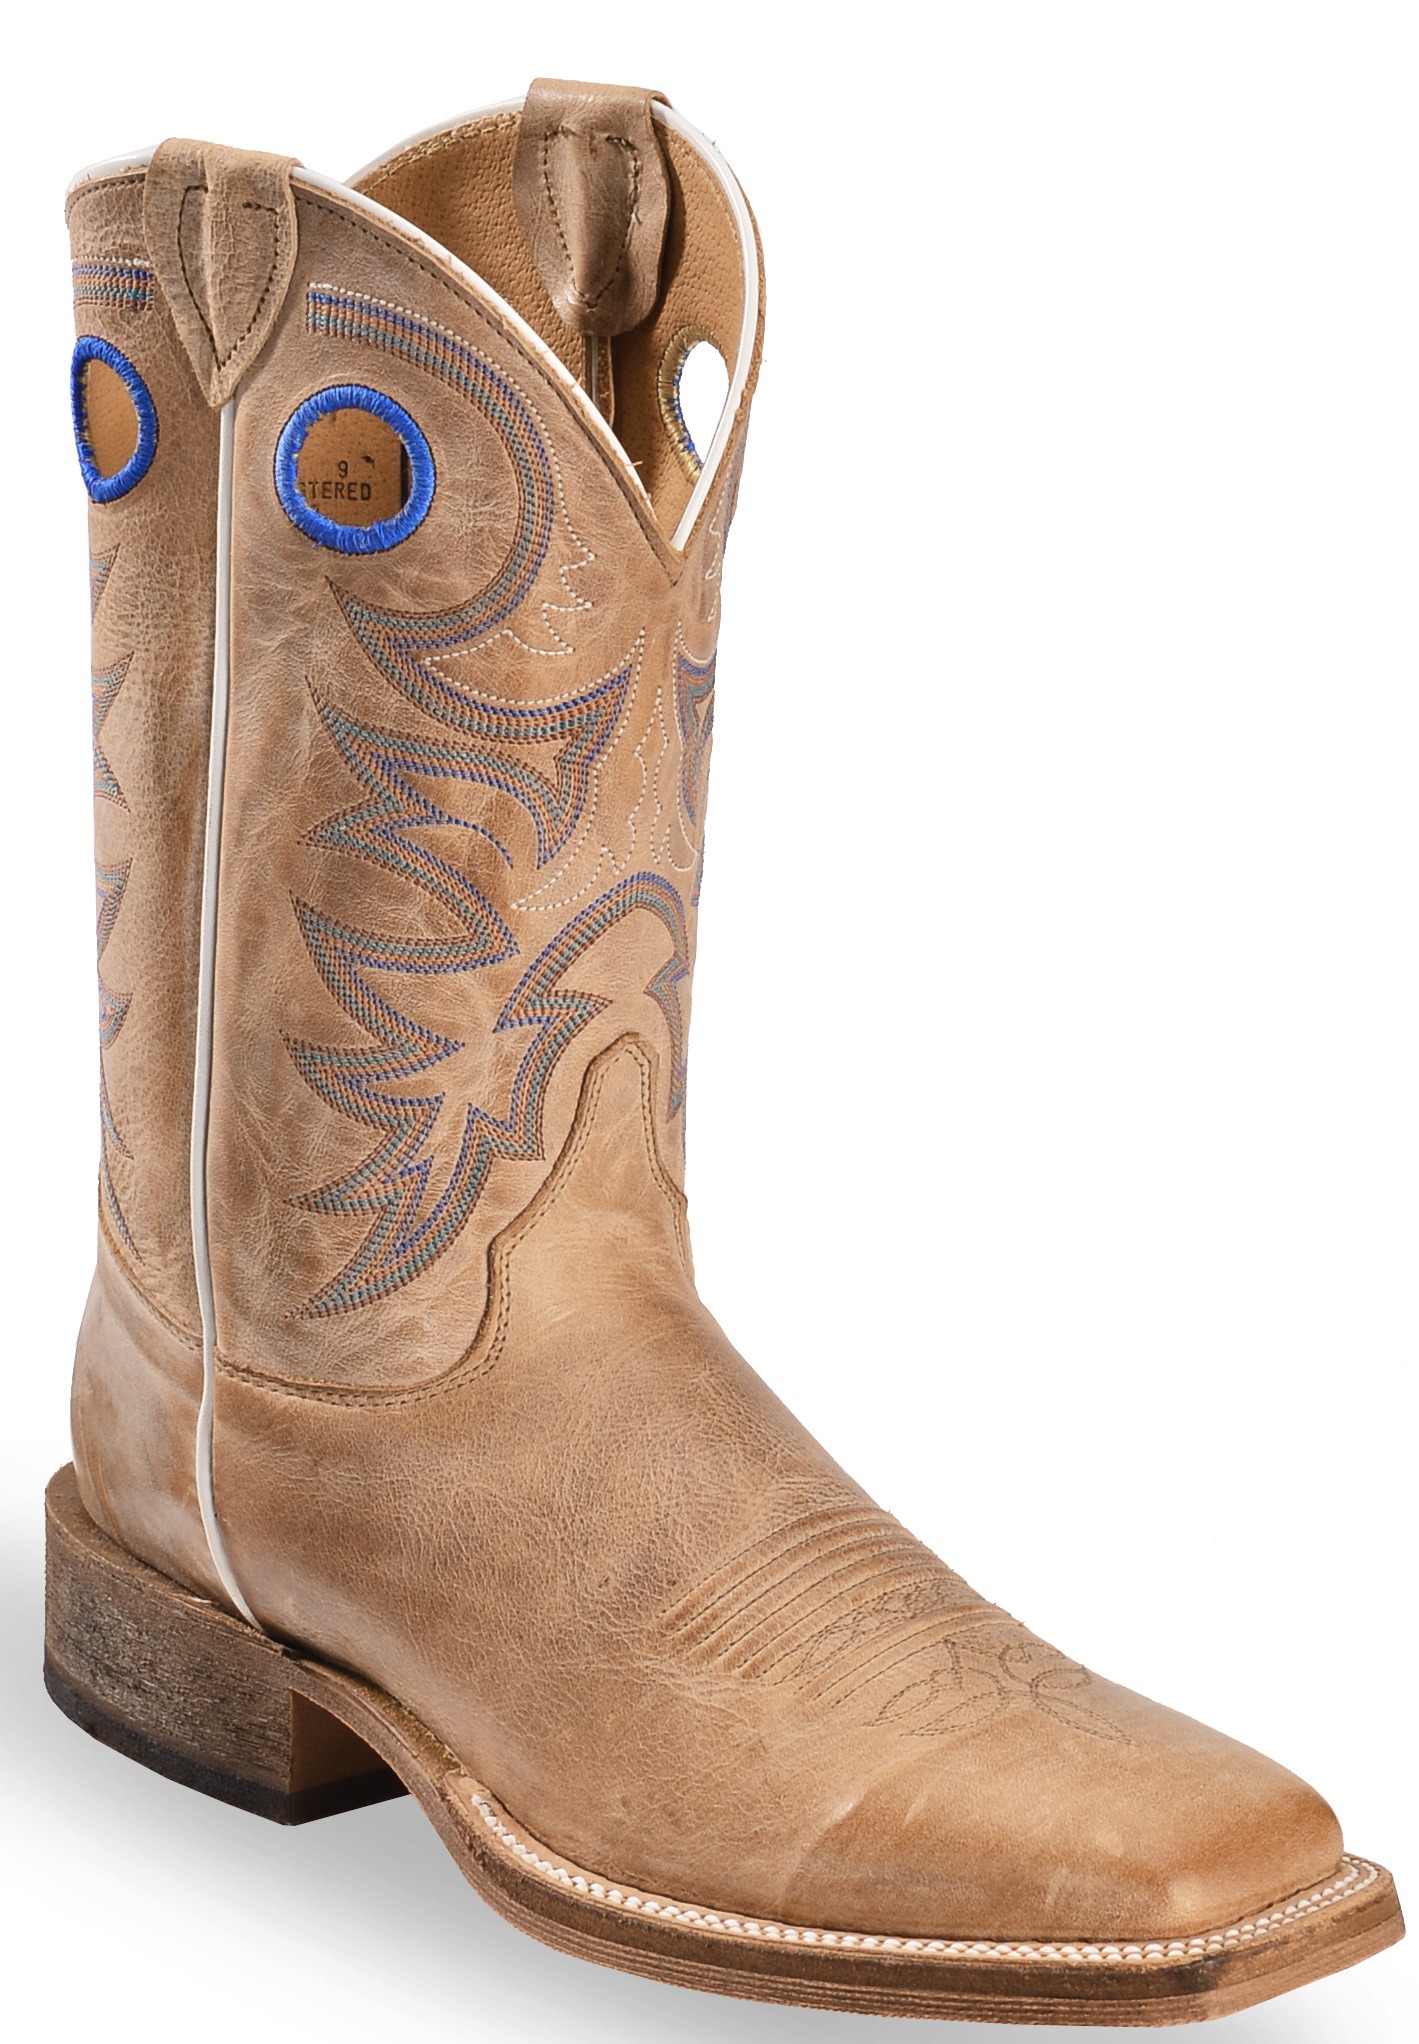 American Cowboy Boots: Made in the USA - Sheplers